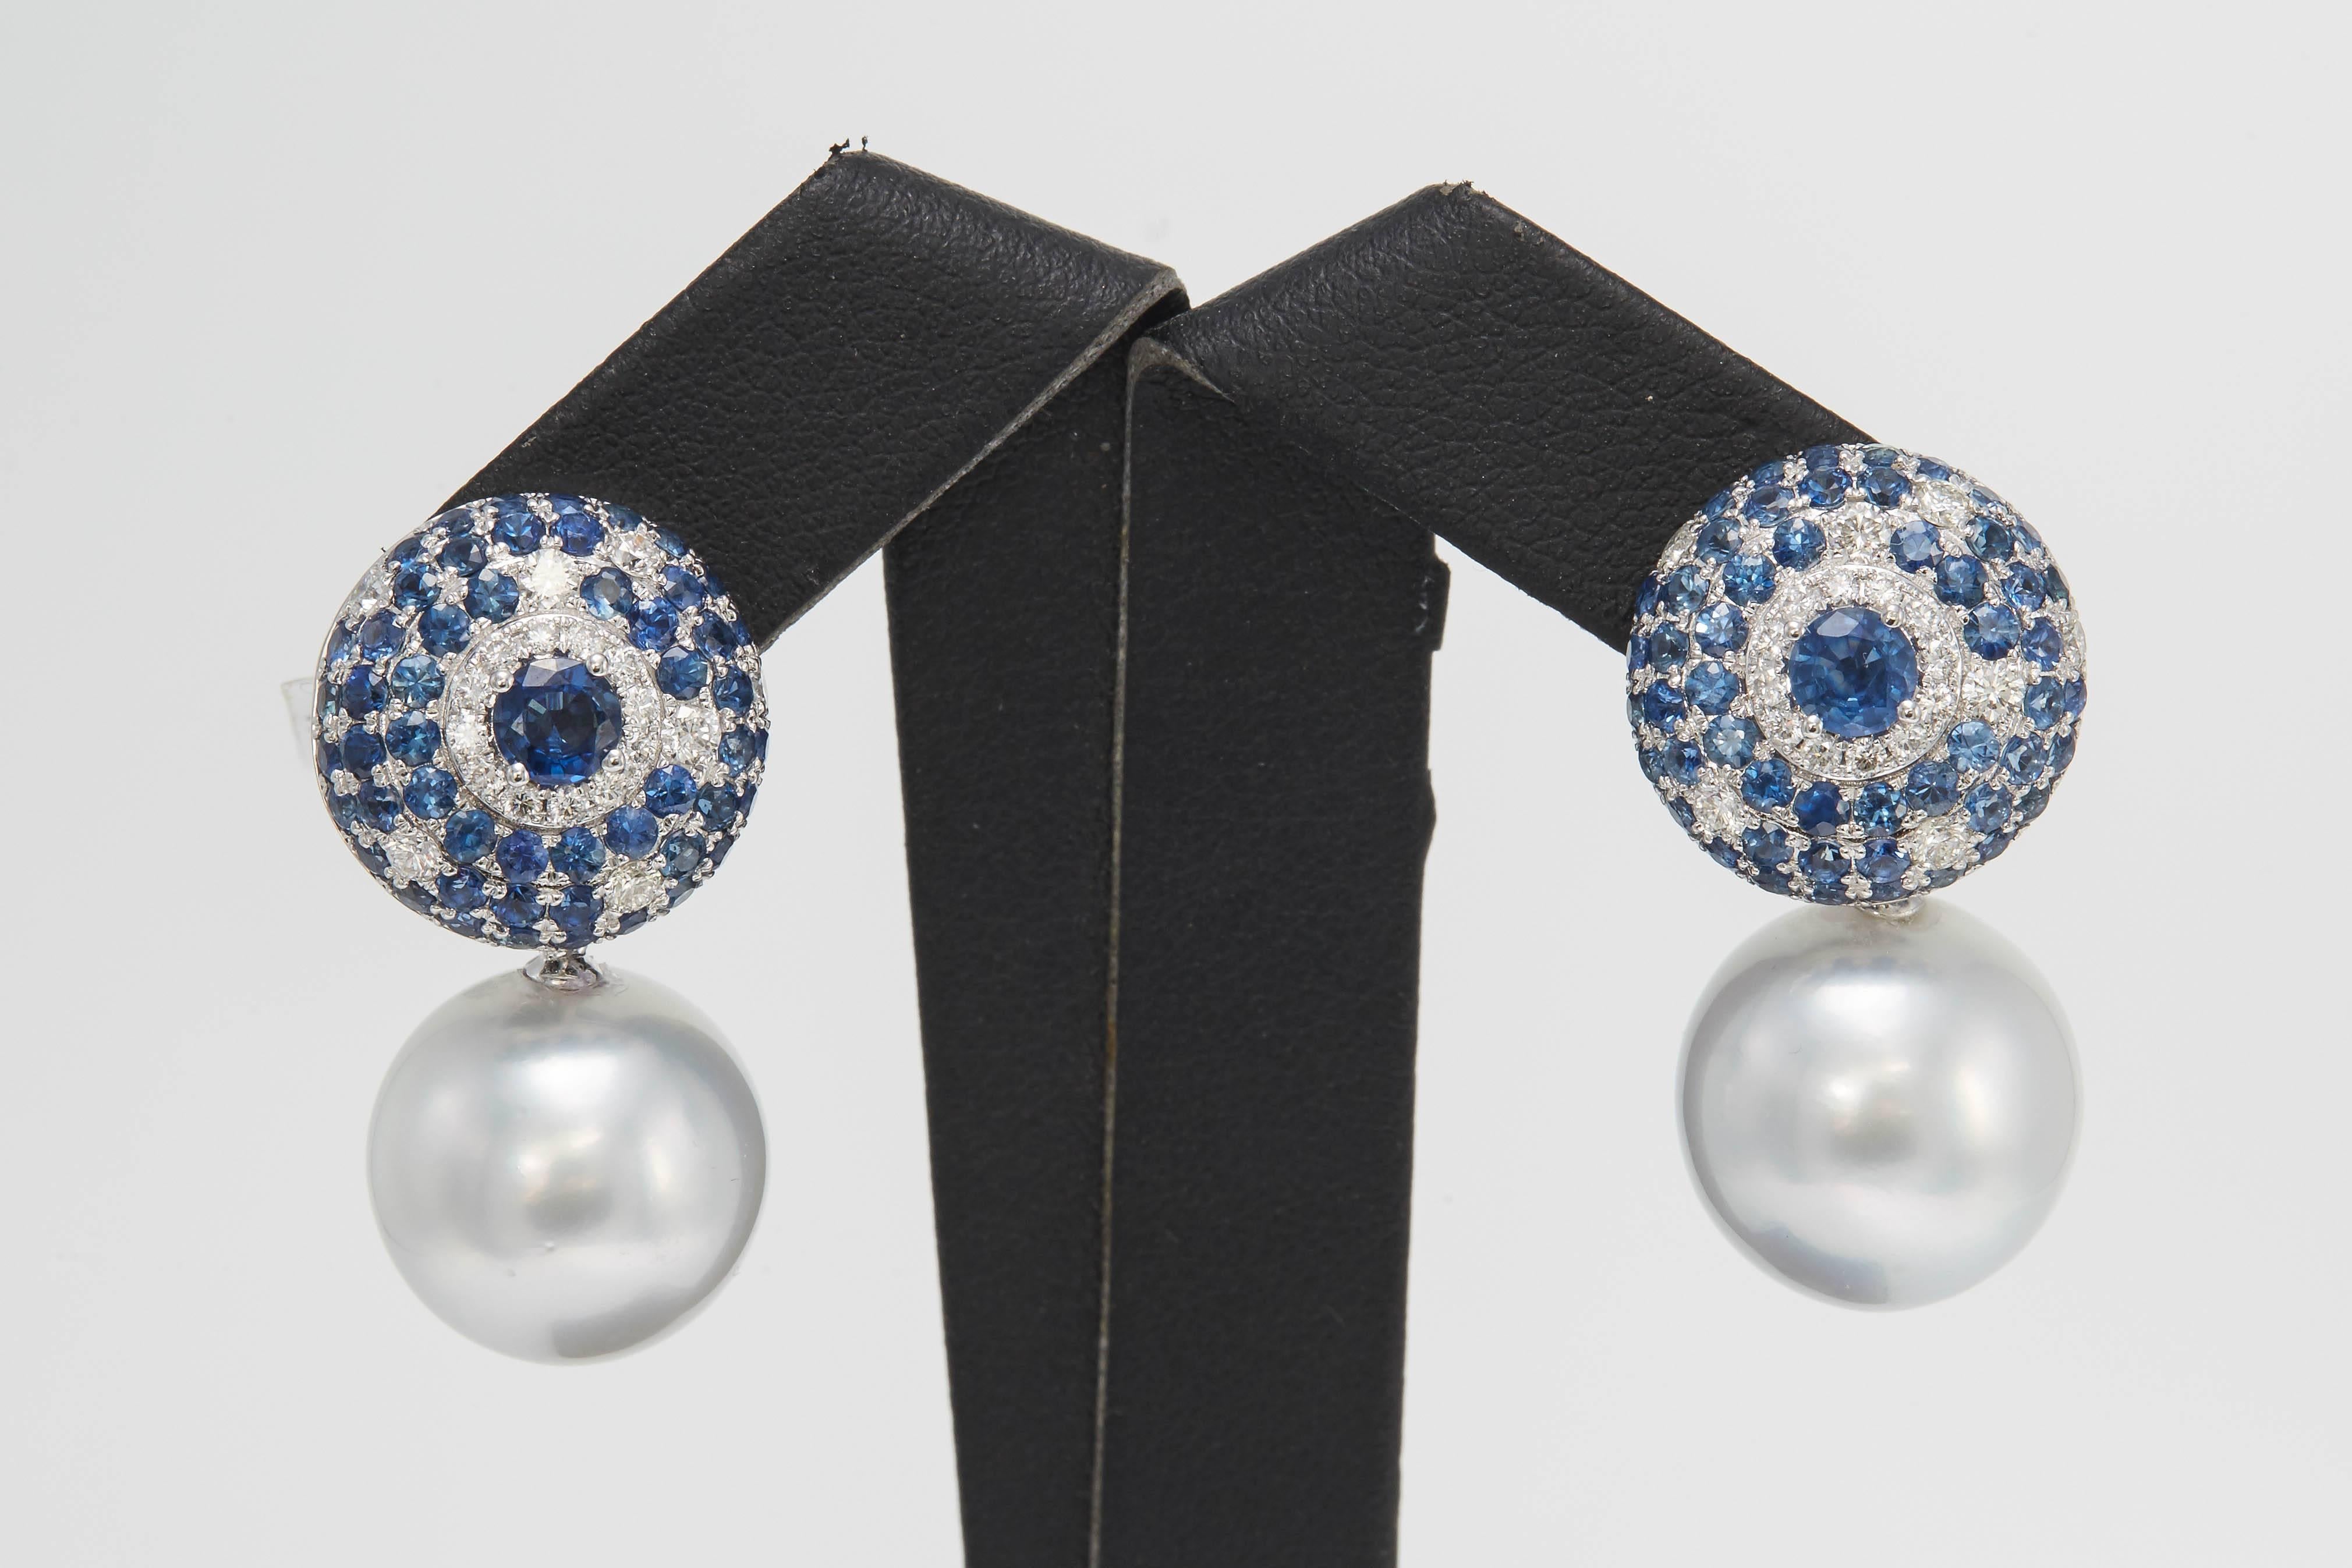  18K White gold earrings featuring two South Sea Pearls measuring 14-15 mm flanked with blue Sapphires weighing 4.90 carats and diamonds weighing 0.63 carats. Color G-H Clarity SI